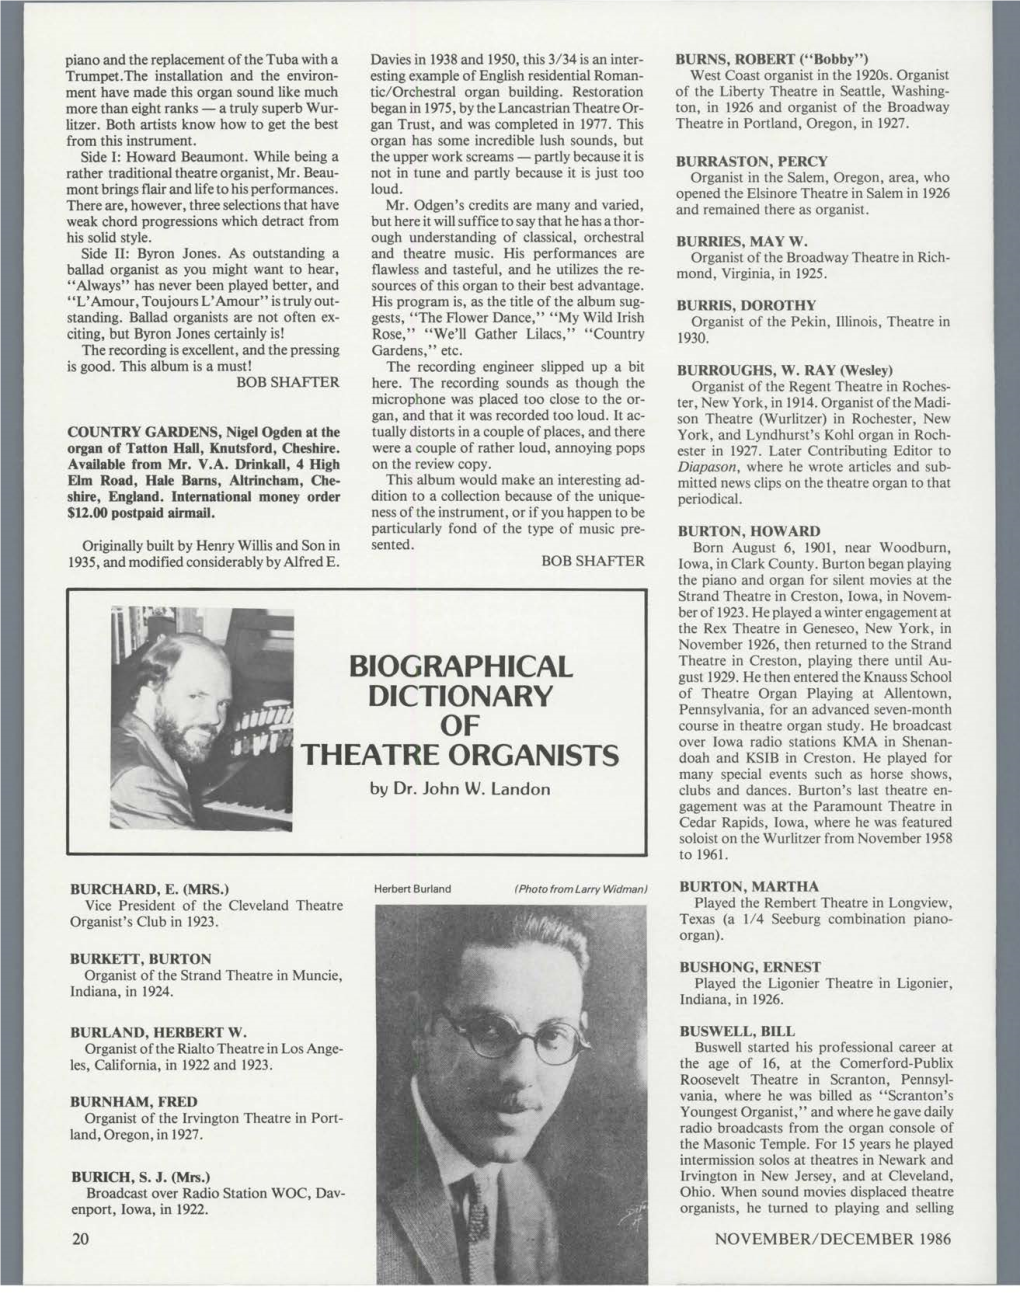 Biographical Dictionary of Theatre Organists